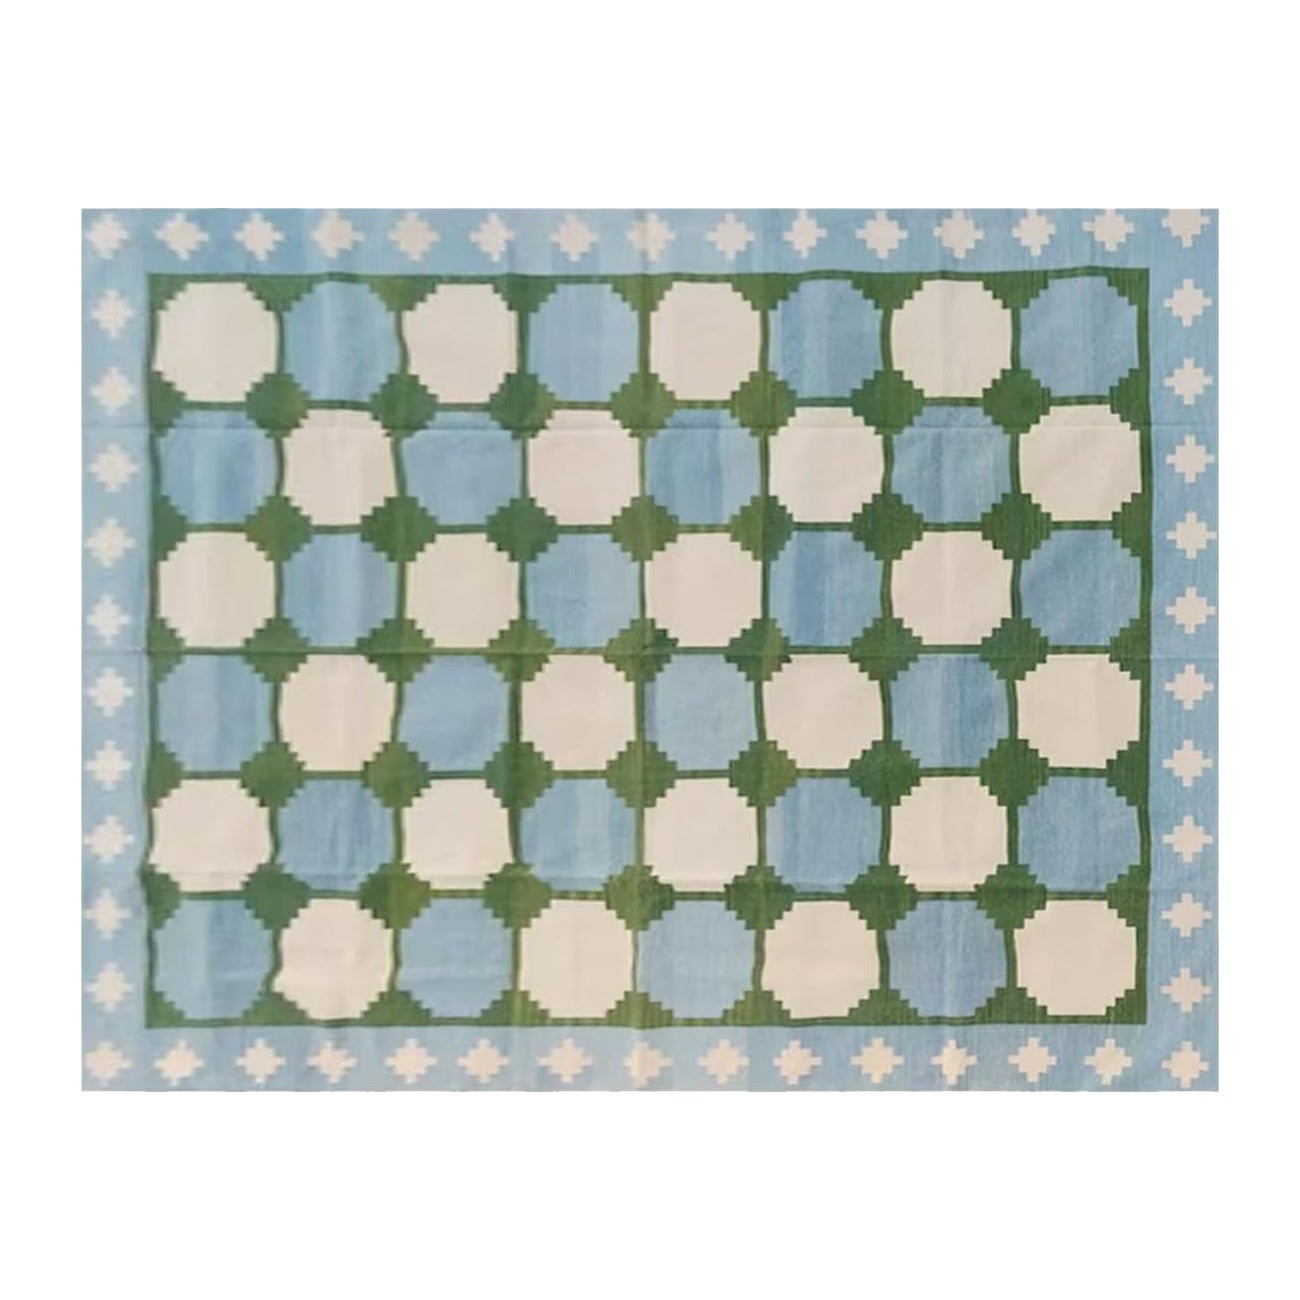 Handmade Cotton Area Flat Weave Rug, Green & Blue Tile Patterned Indian Dhurrie